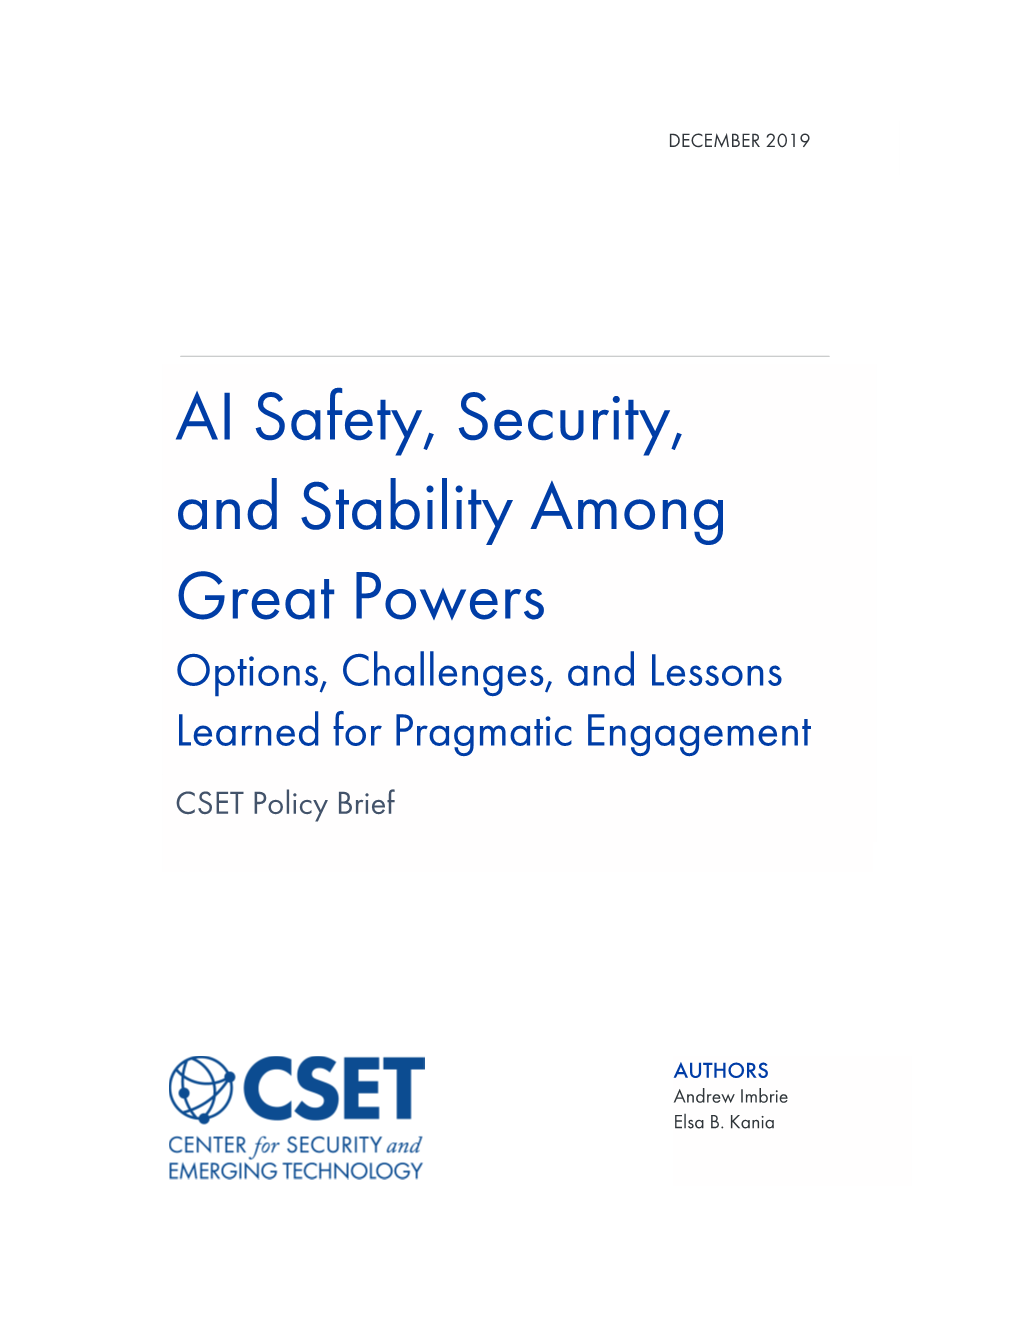 CSET Policy Brief